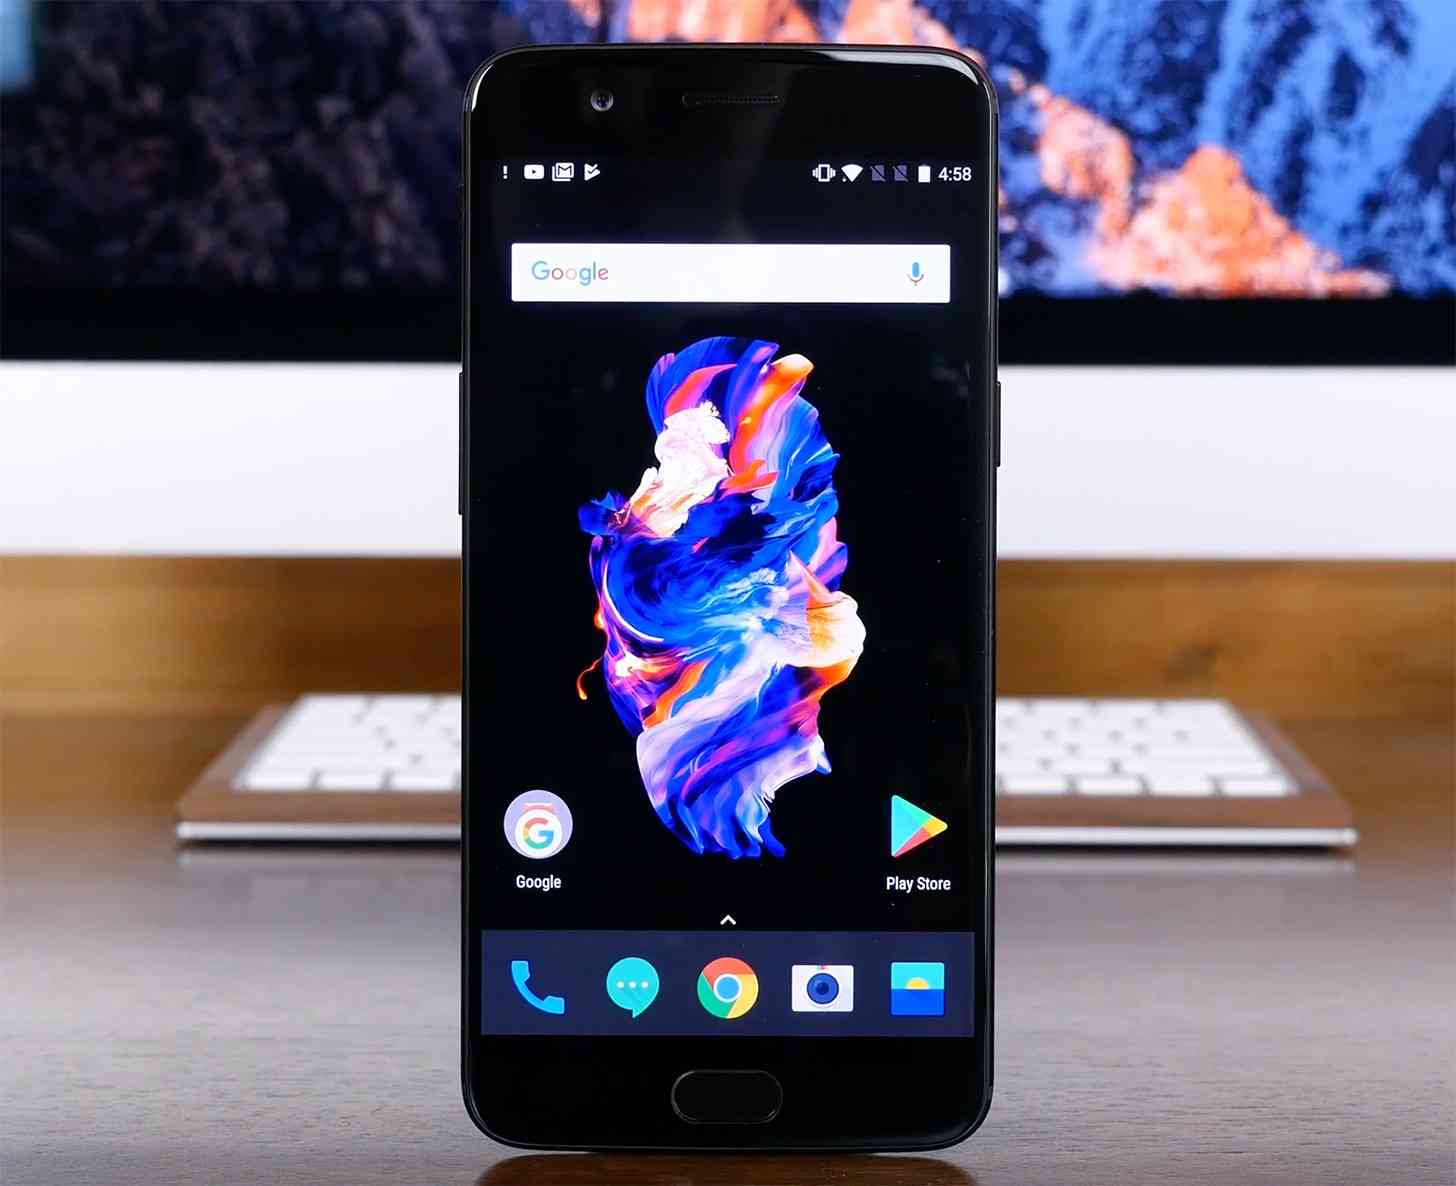 OnePlus 5 hands-on video